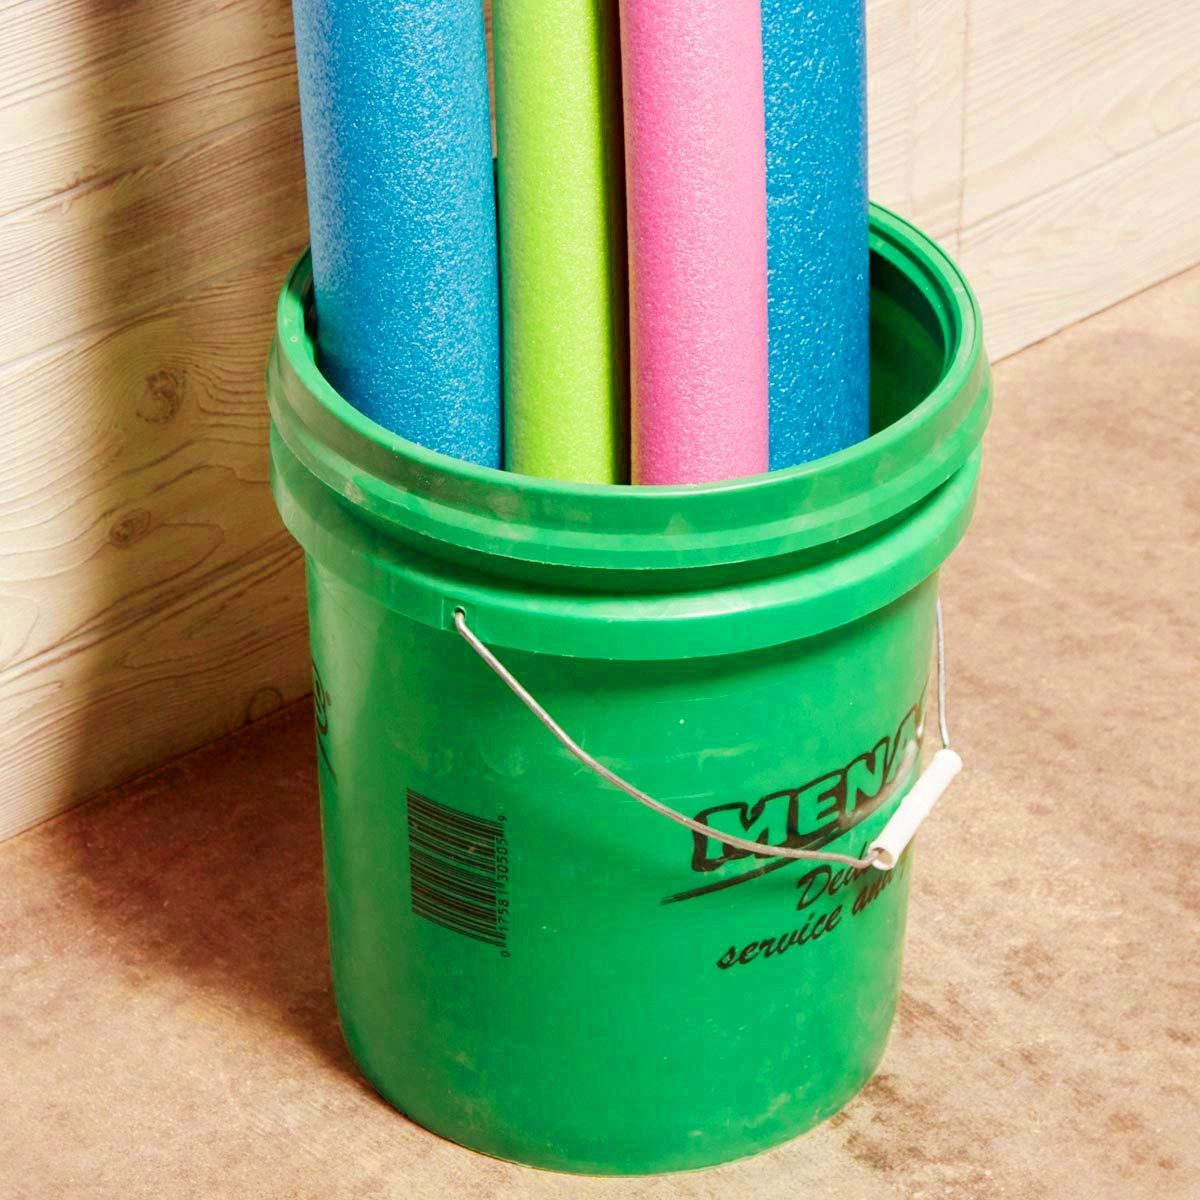 a green 5 gallon bucket filled with colorful pool noodles